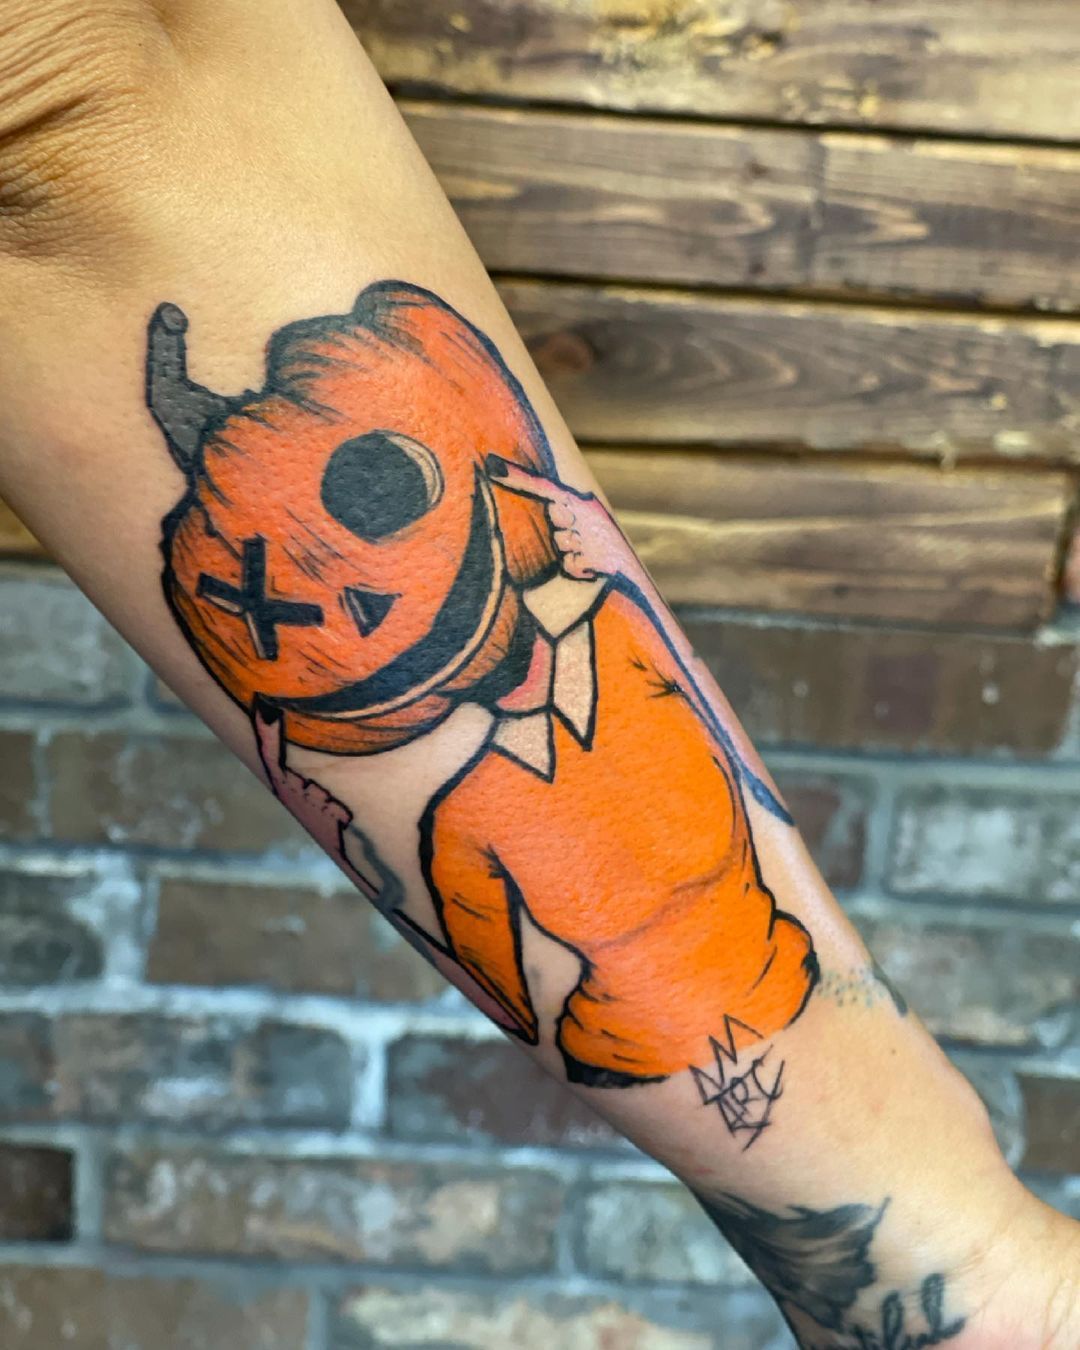 Alex Miller Tattoos  Sam from trickrtreat I did on Saturday Always fun  to do these As always hit me up for your next tattoo dm or 6109181920       